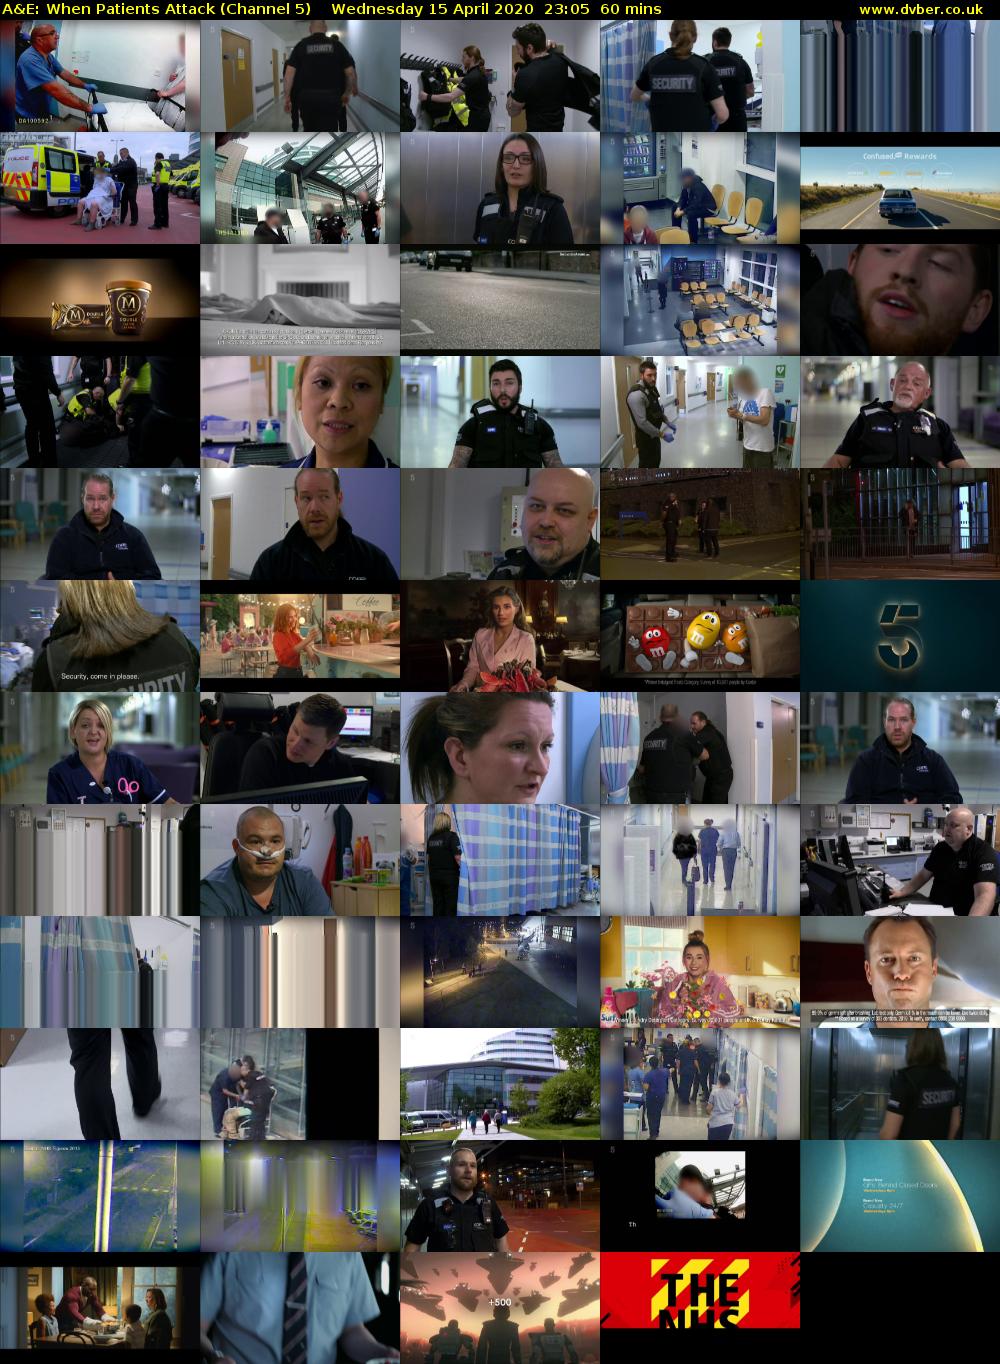 A&E: When Patients Attack (Channel 5) Wednesday 15 April 2020 23:05 - 00:05